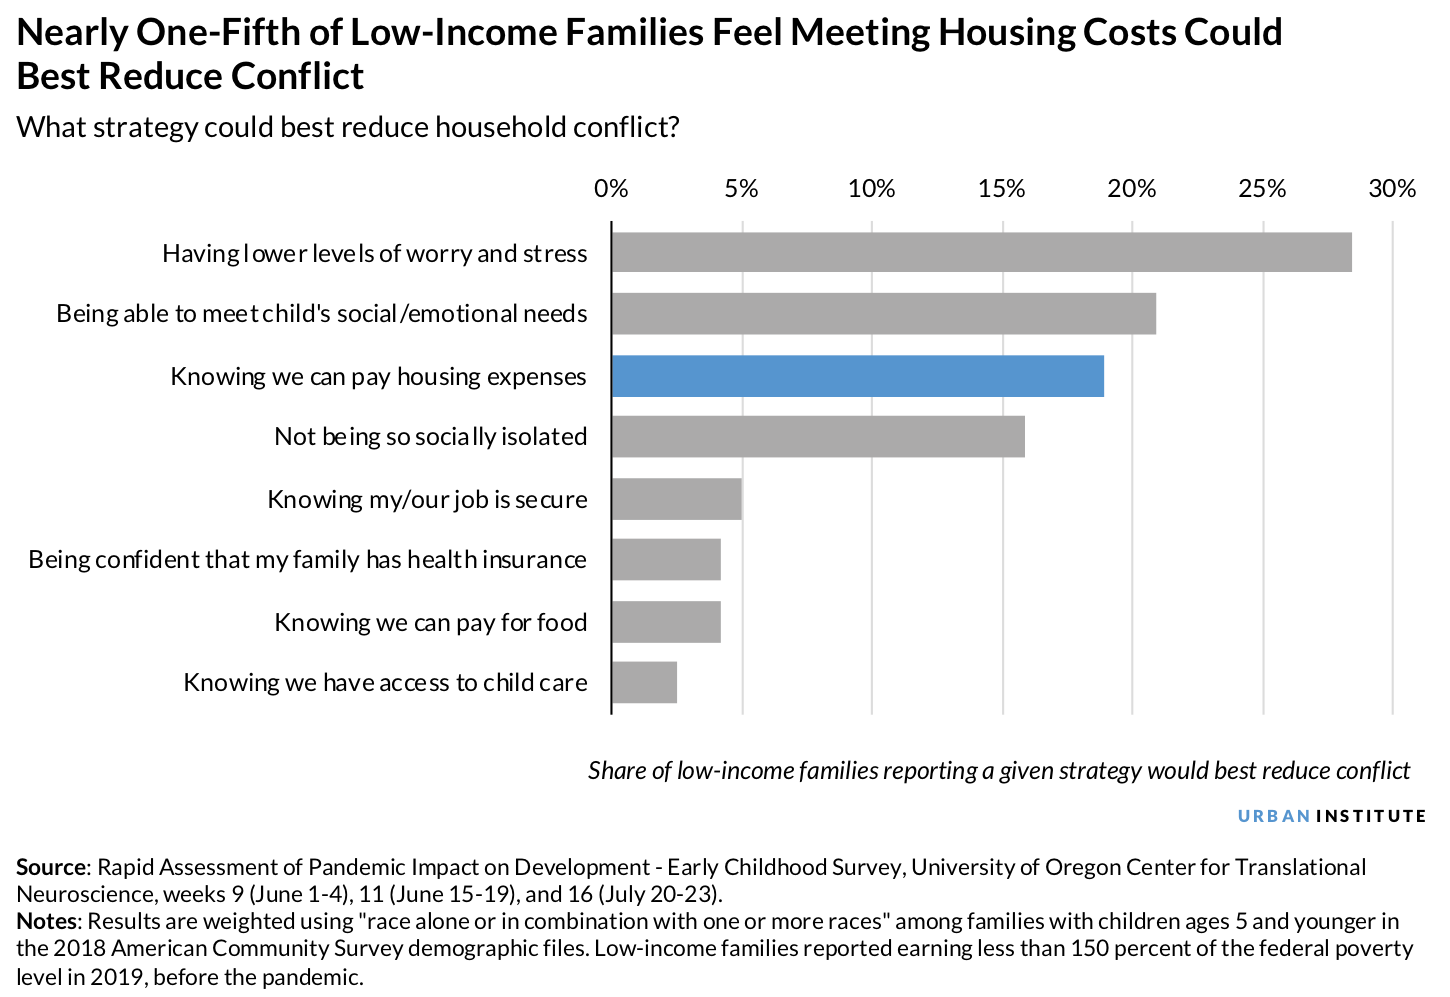 Families that feel meeting housing costs could reduce household conflict